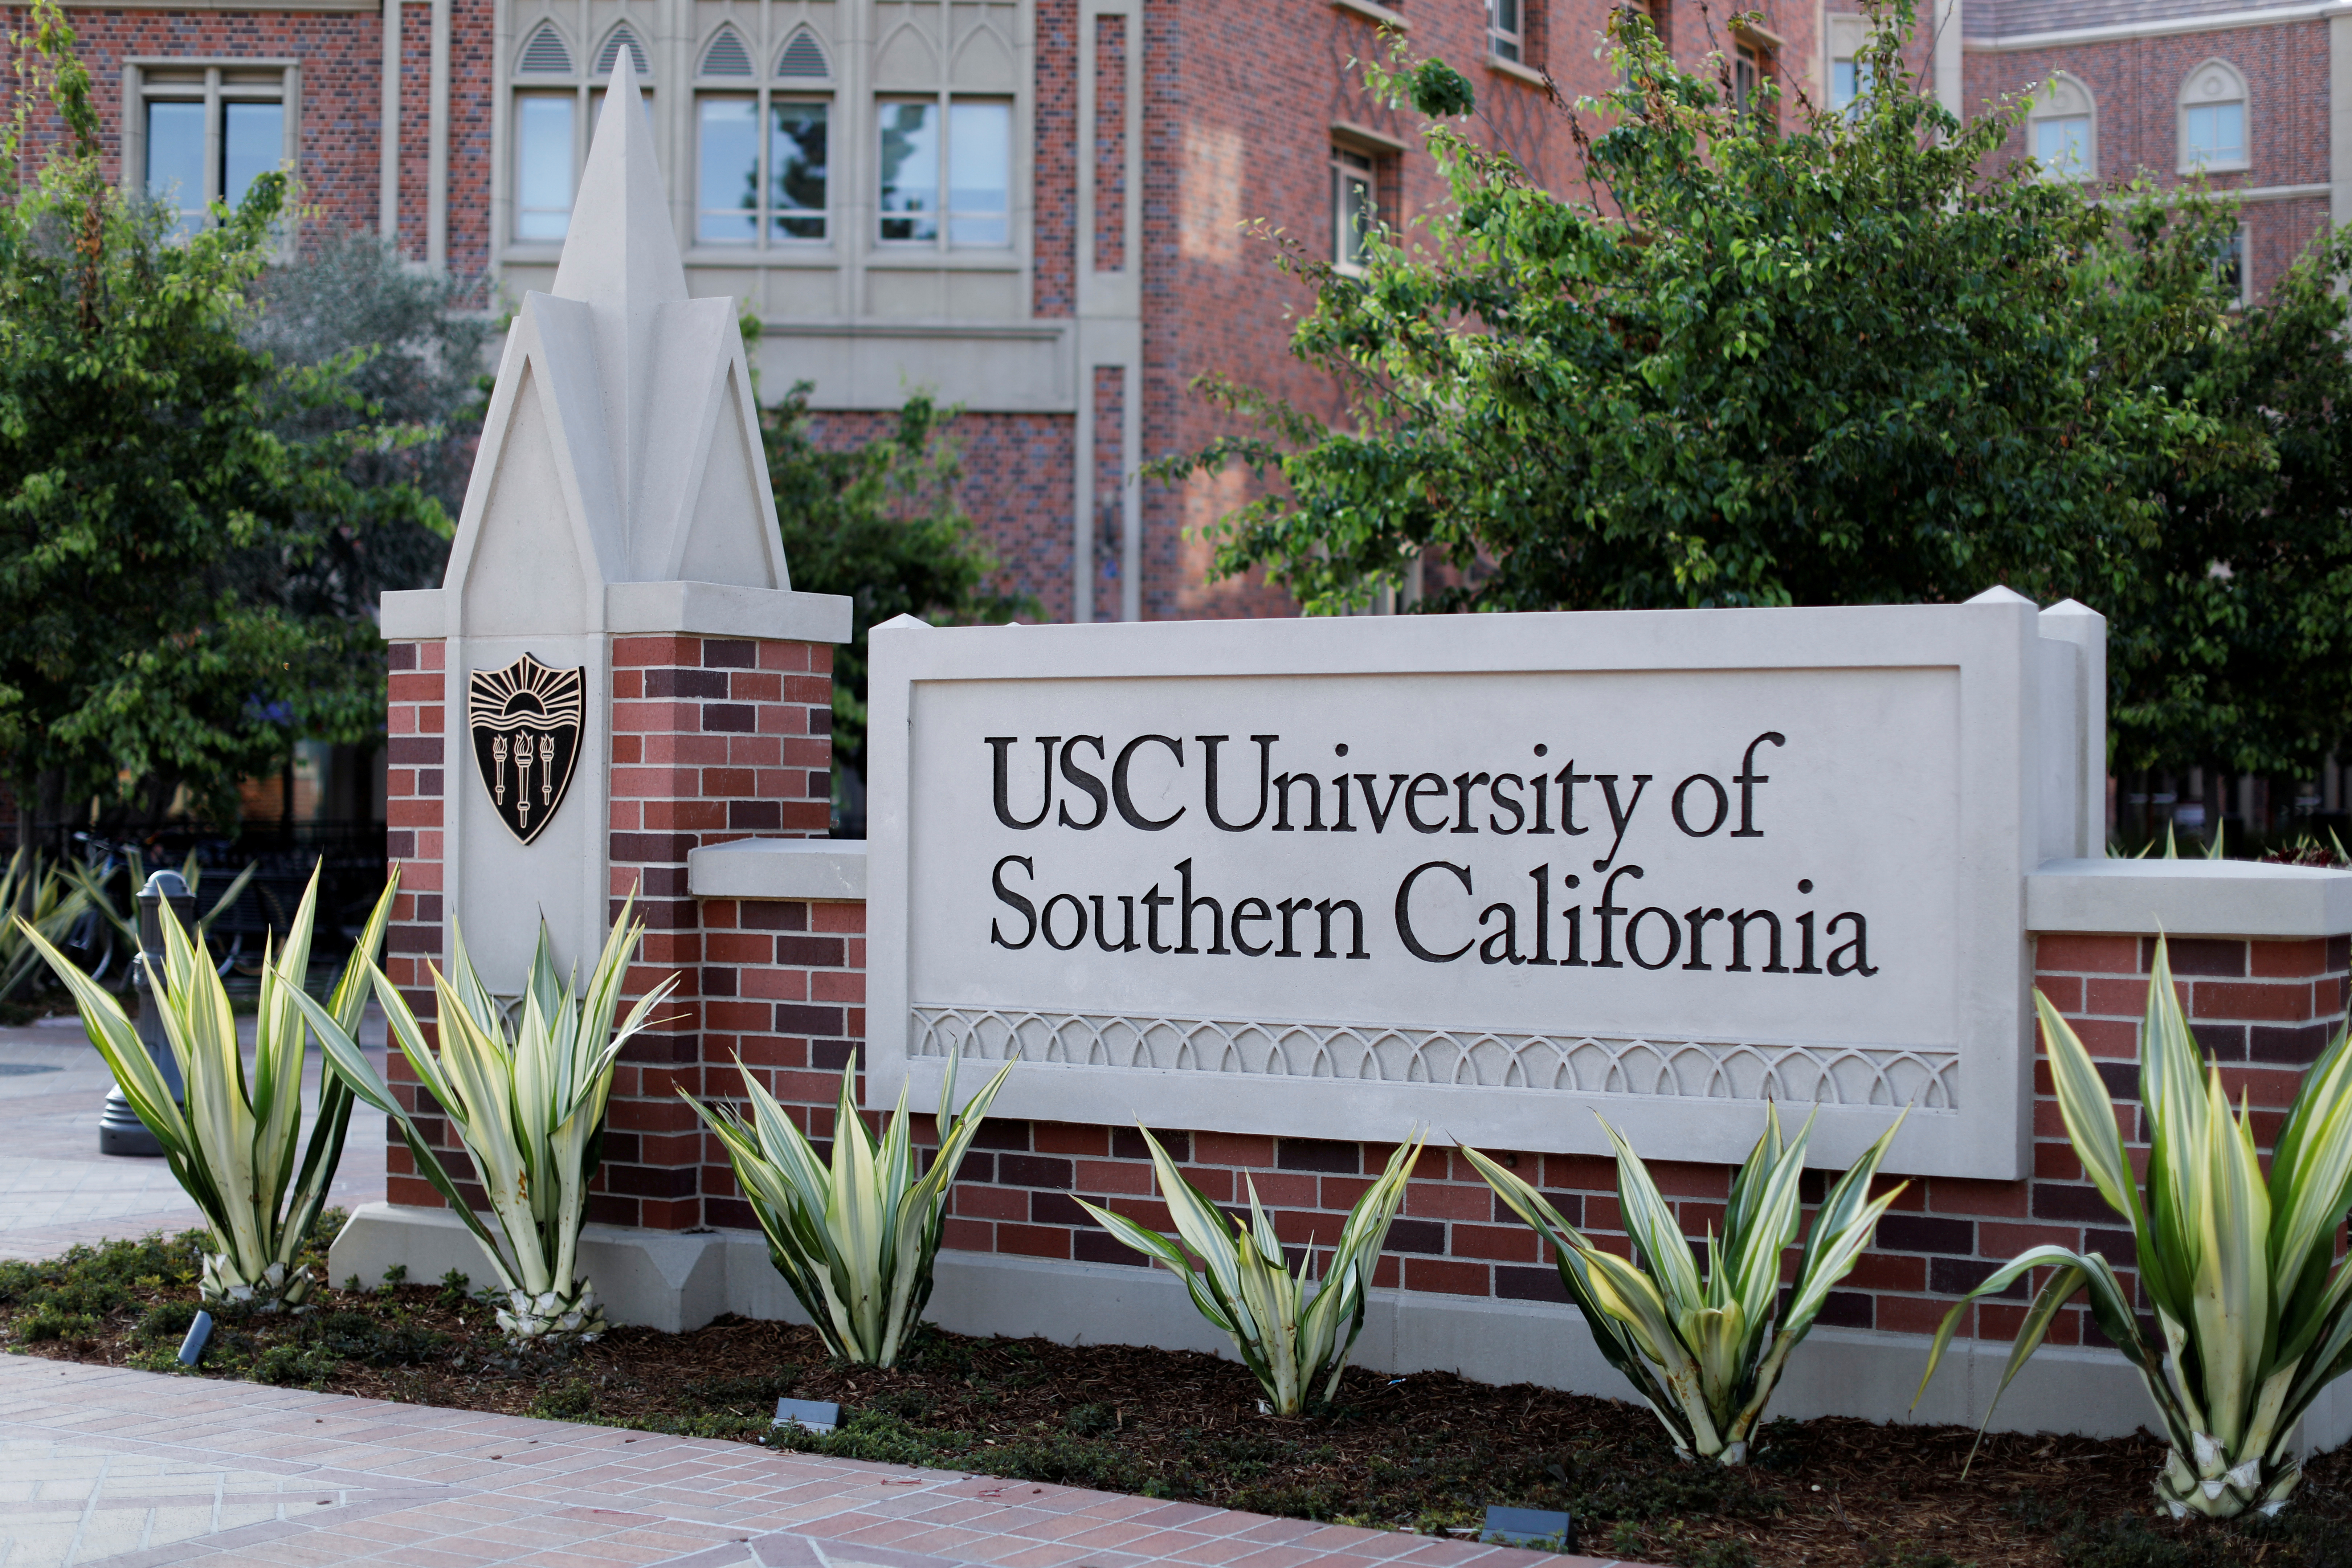 The University of Southern California is pictured in Los Angeles, California